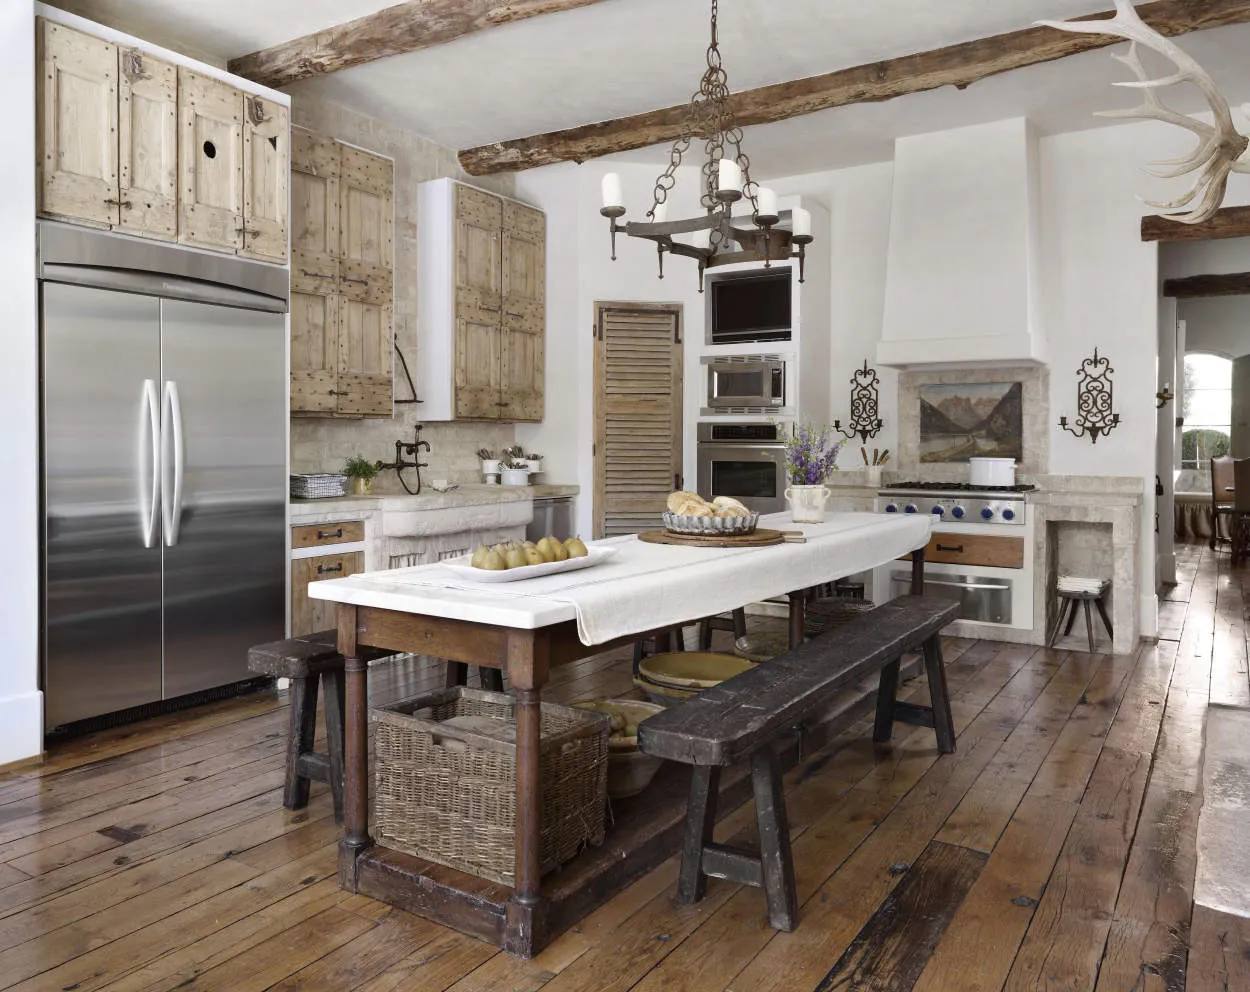 French Country Kitchen: Rustic Elegance Cooking Spaces